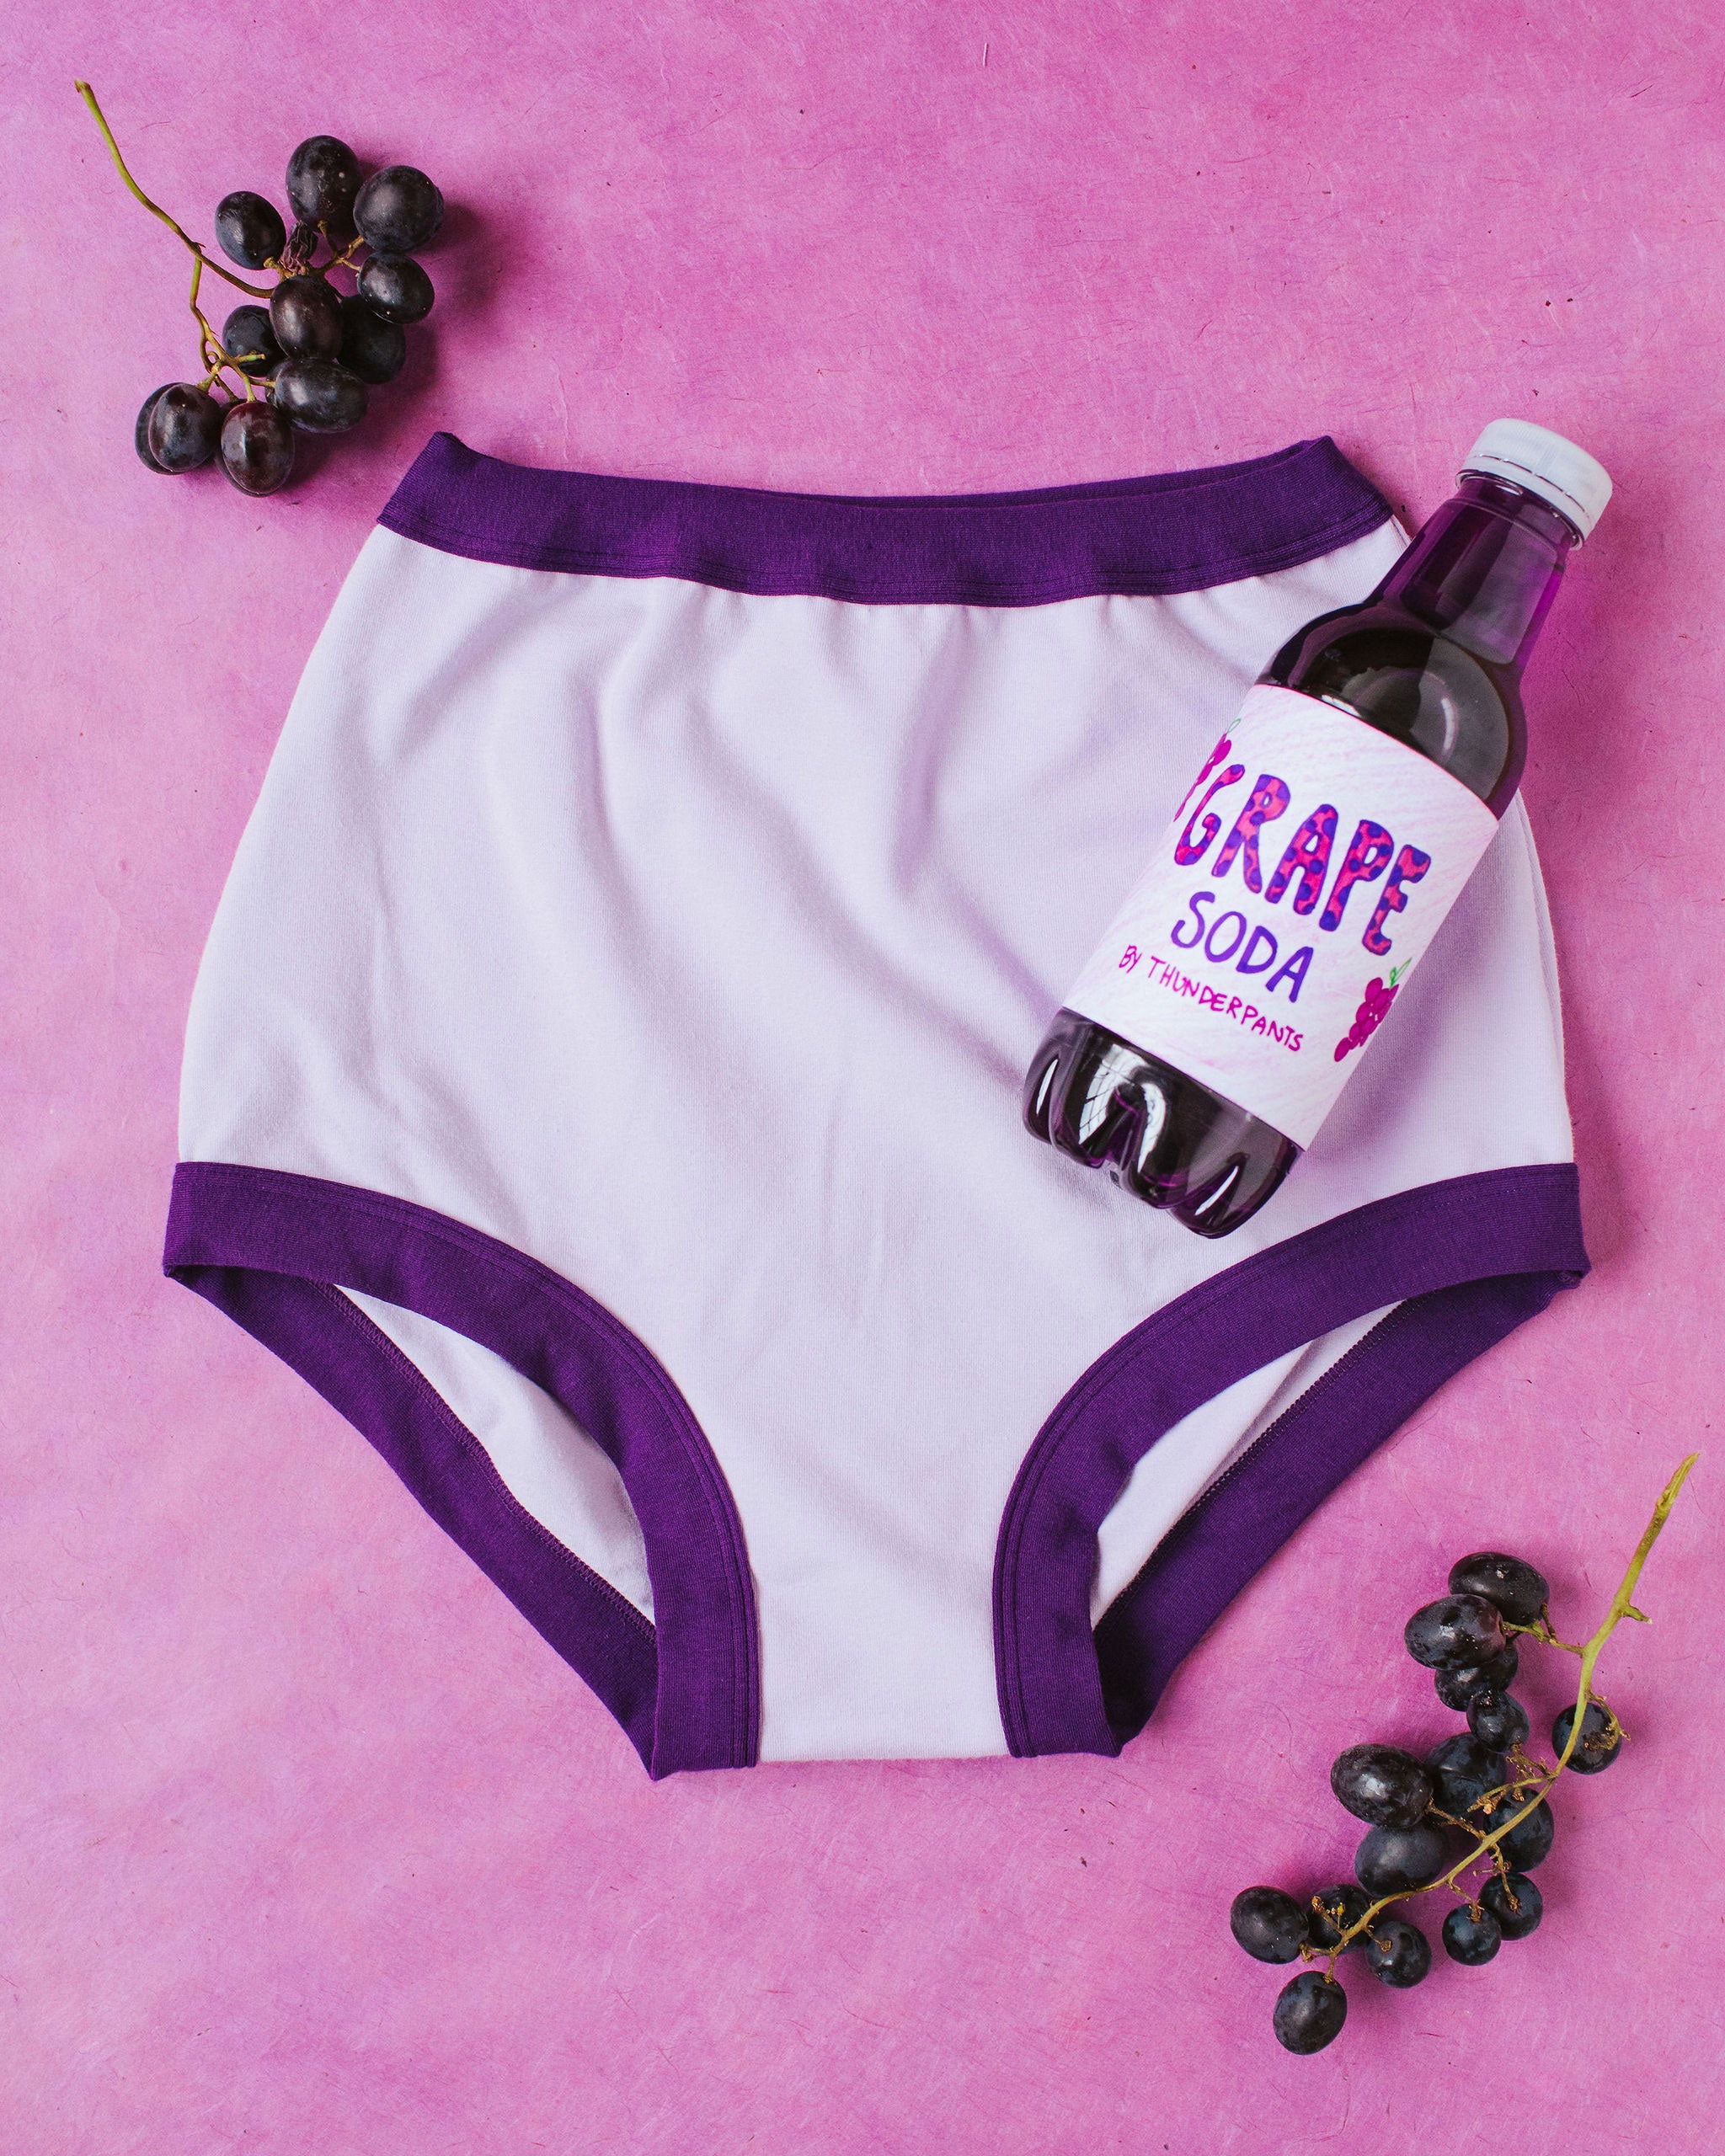 Flat lay with grape soda bottle on a purple surface of Sky Rise style underwear in Grape Soda: lavender color with dark purple binding.